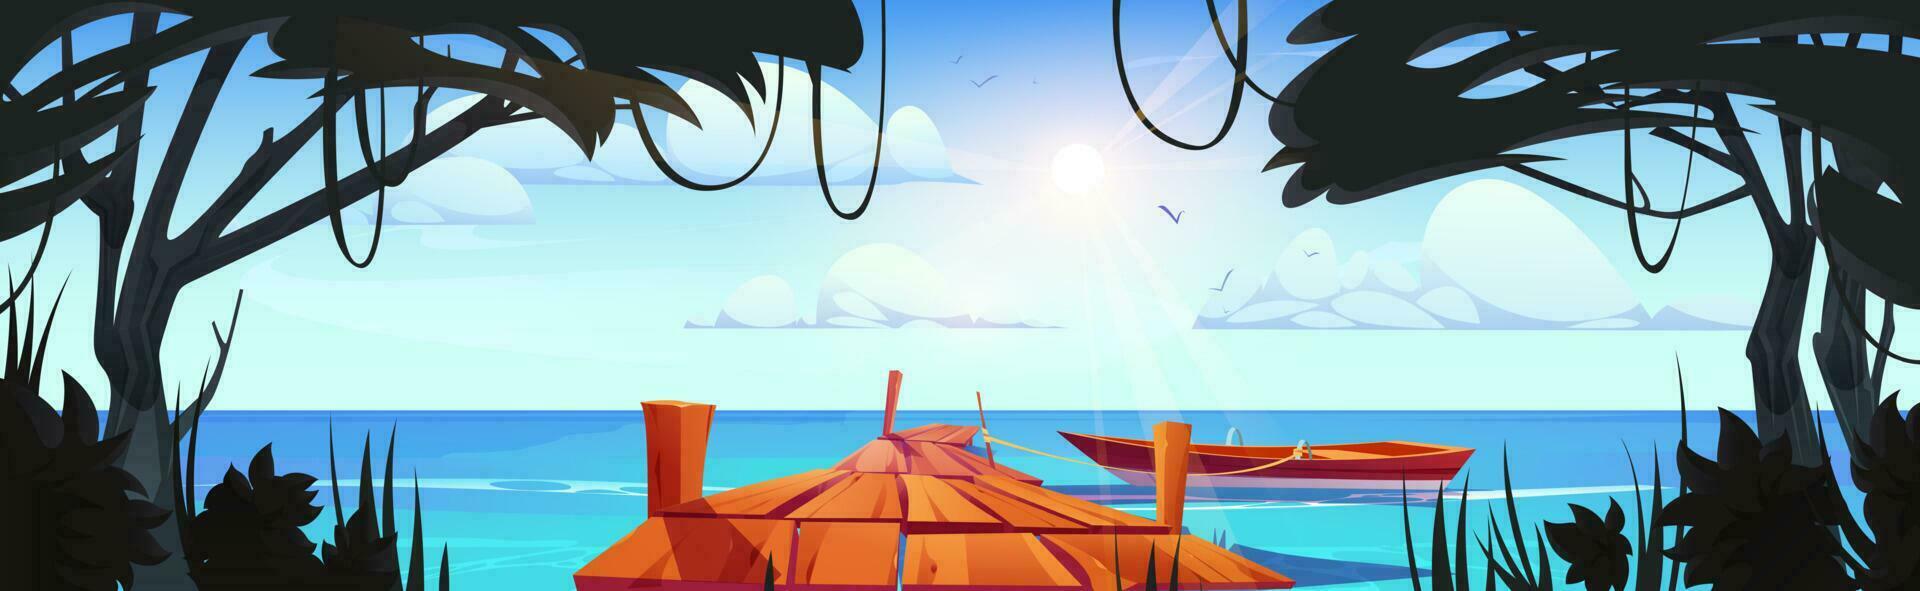 Wooden pier in jungle forest with boat vector